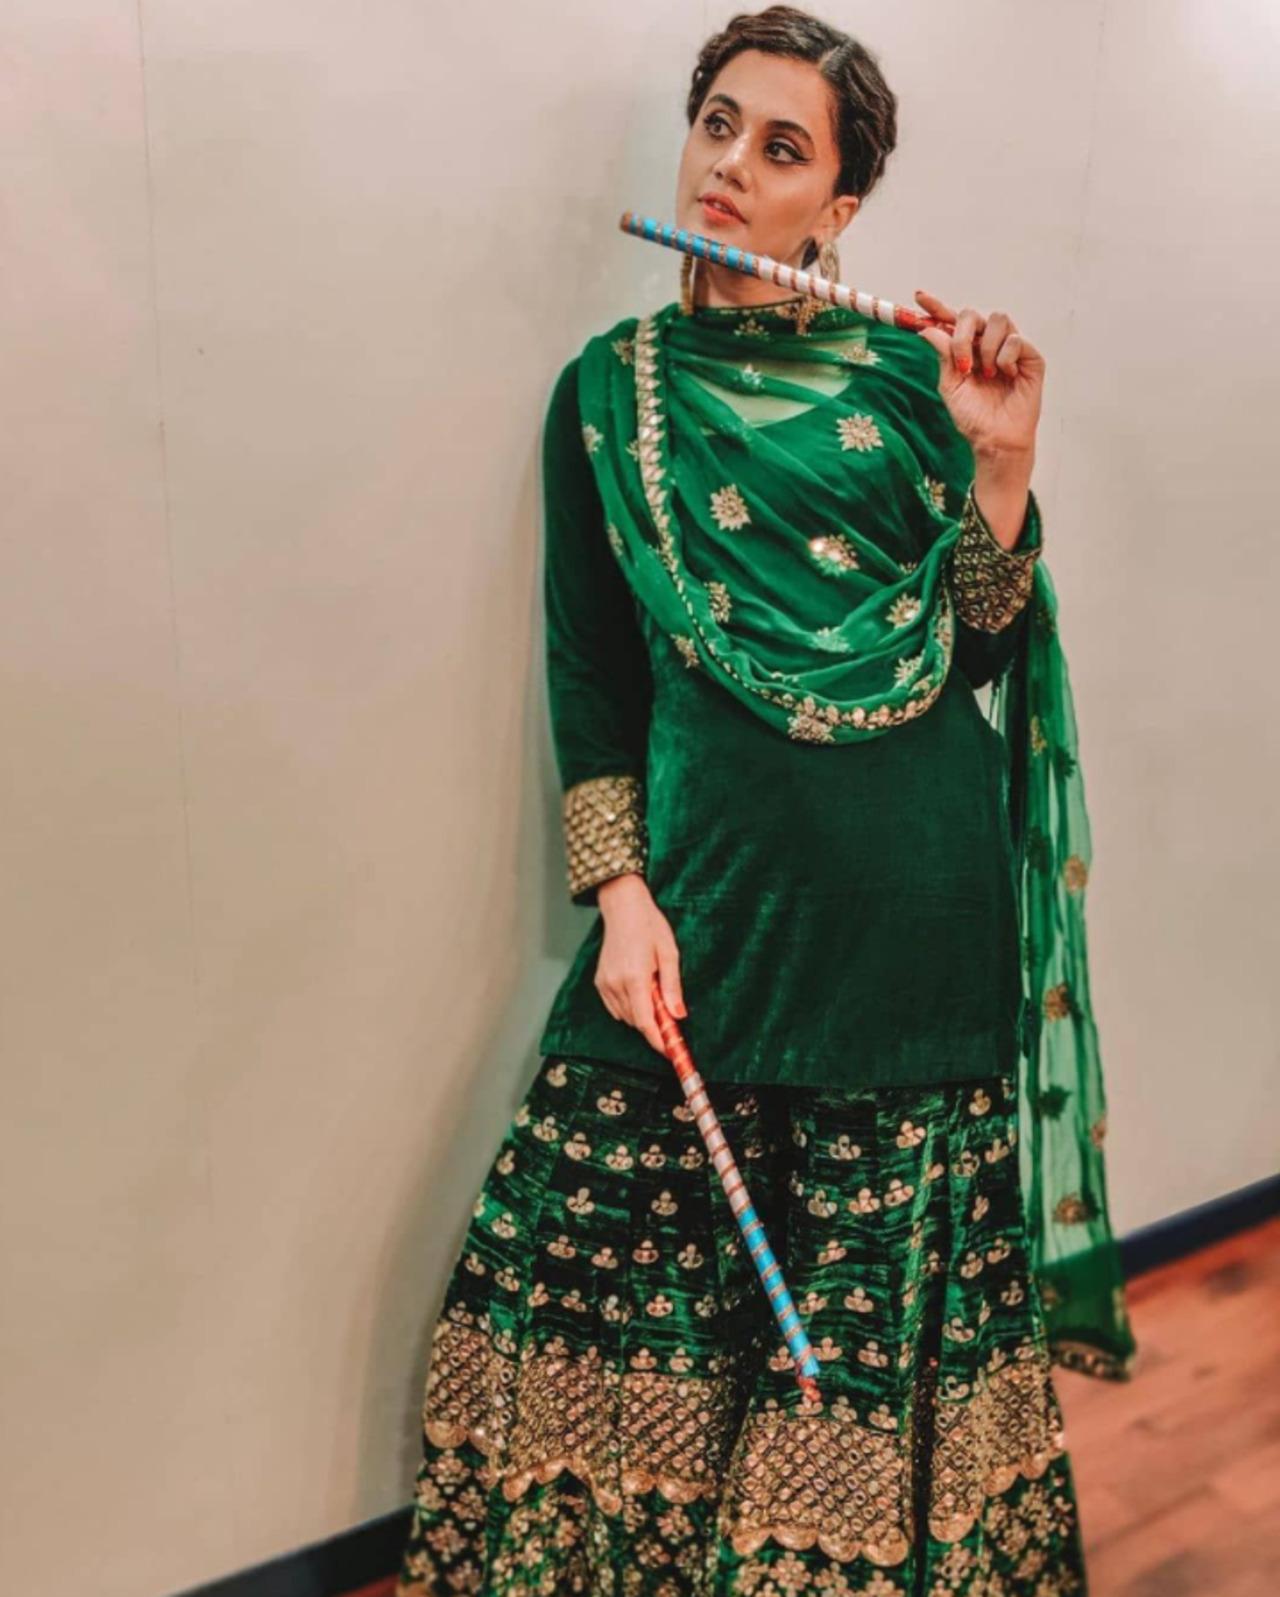 Taapsee Pannu looks Dandiya ready in her deep-green sharara and dupatta! Navratri is still a ways away, but why not take inspiration for Hariyali Teej from this glamorous yet elegant festival outfit?